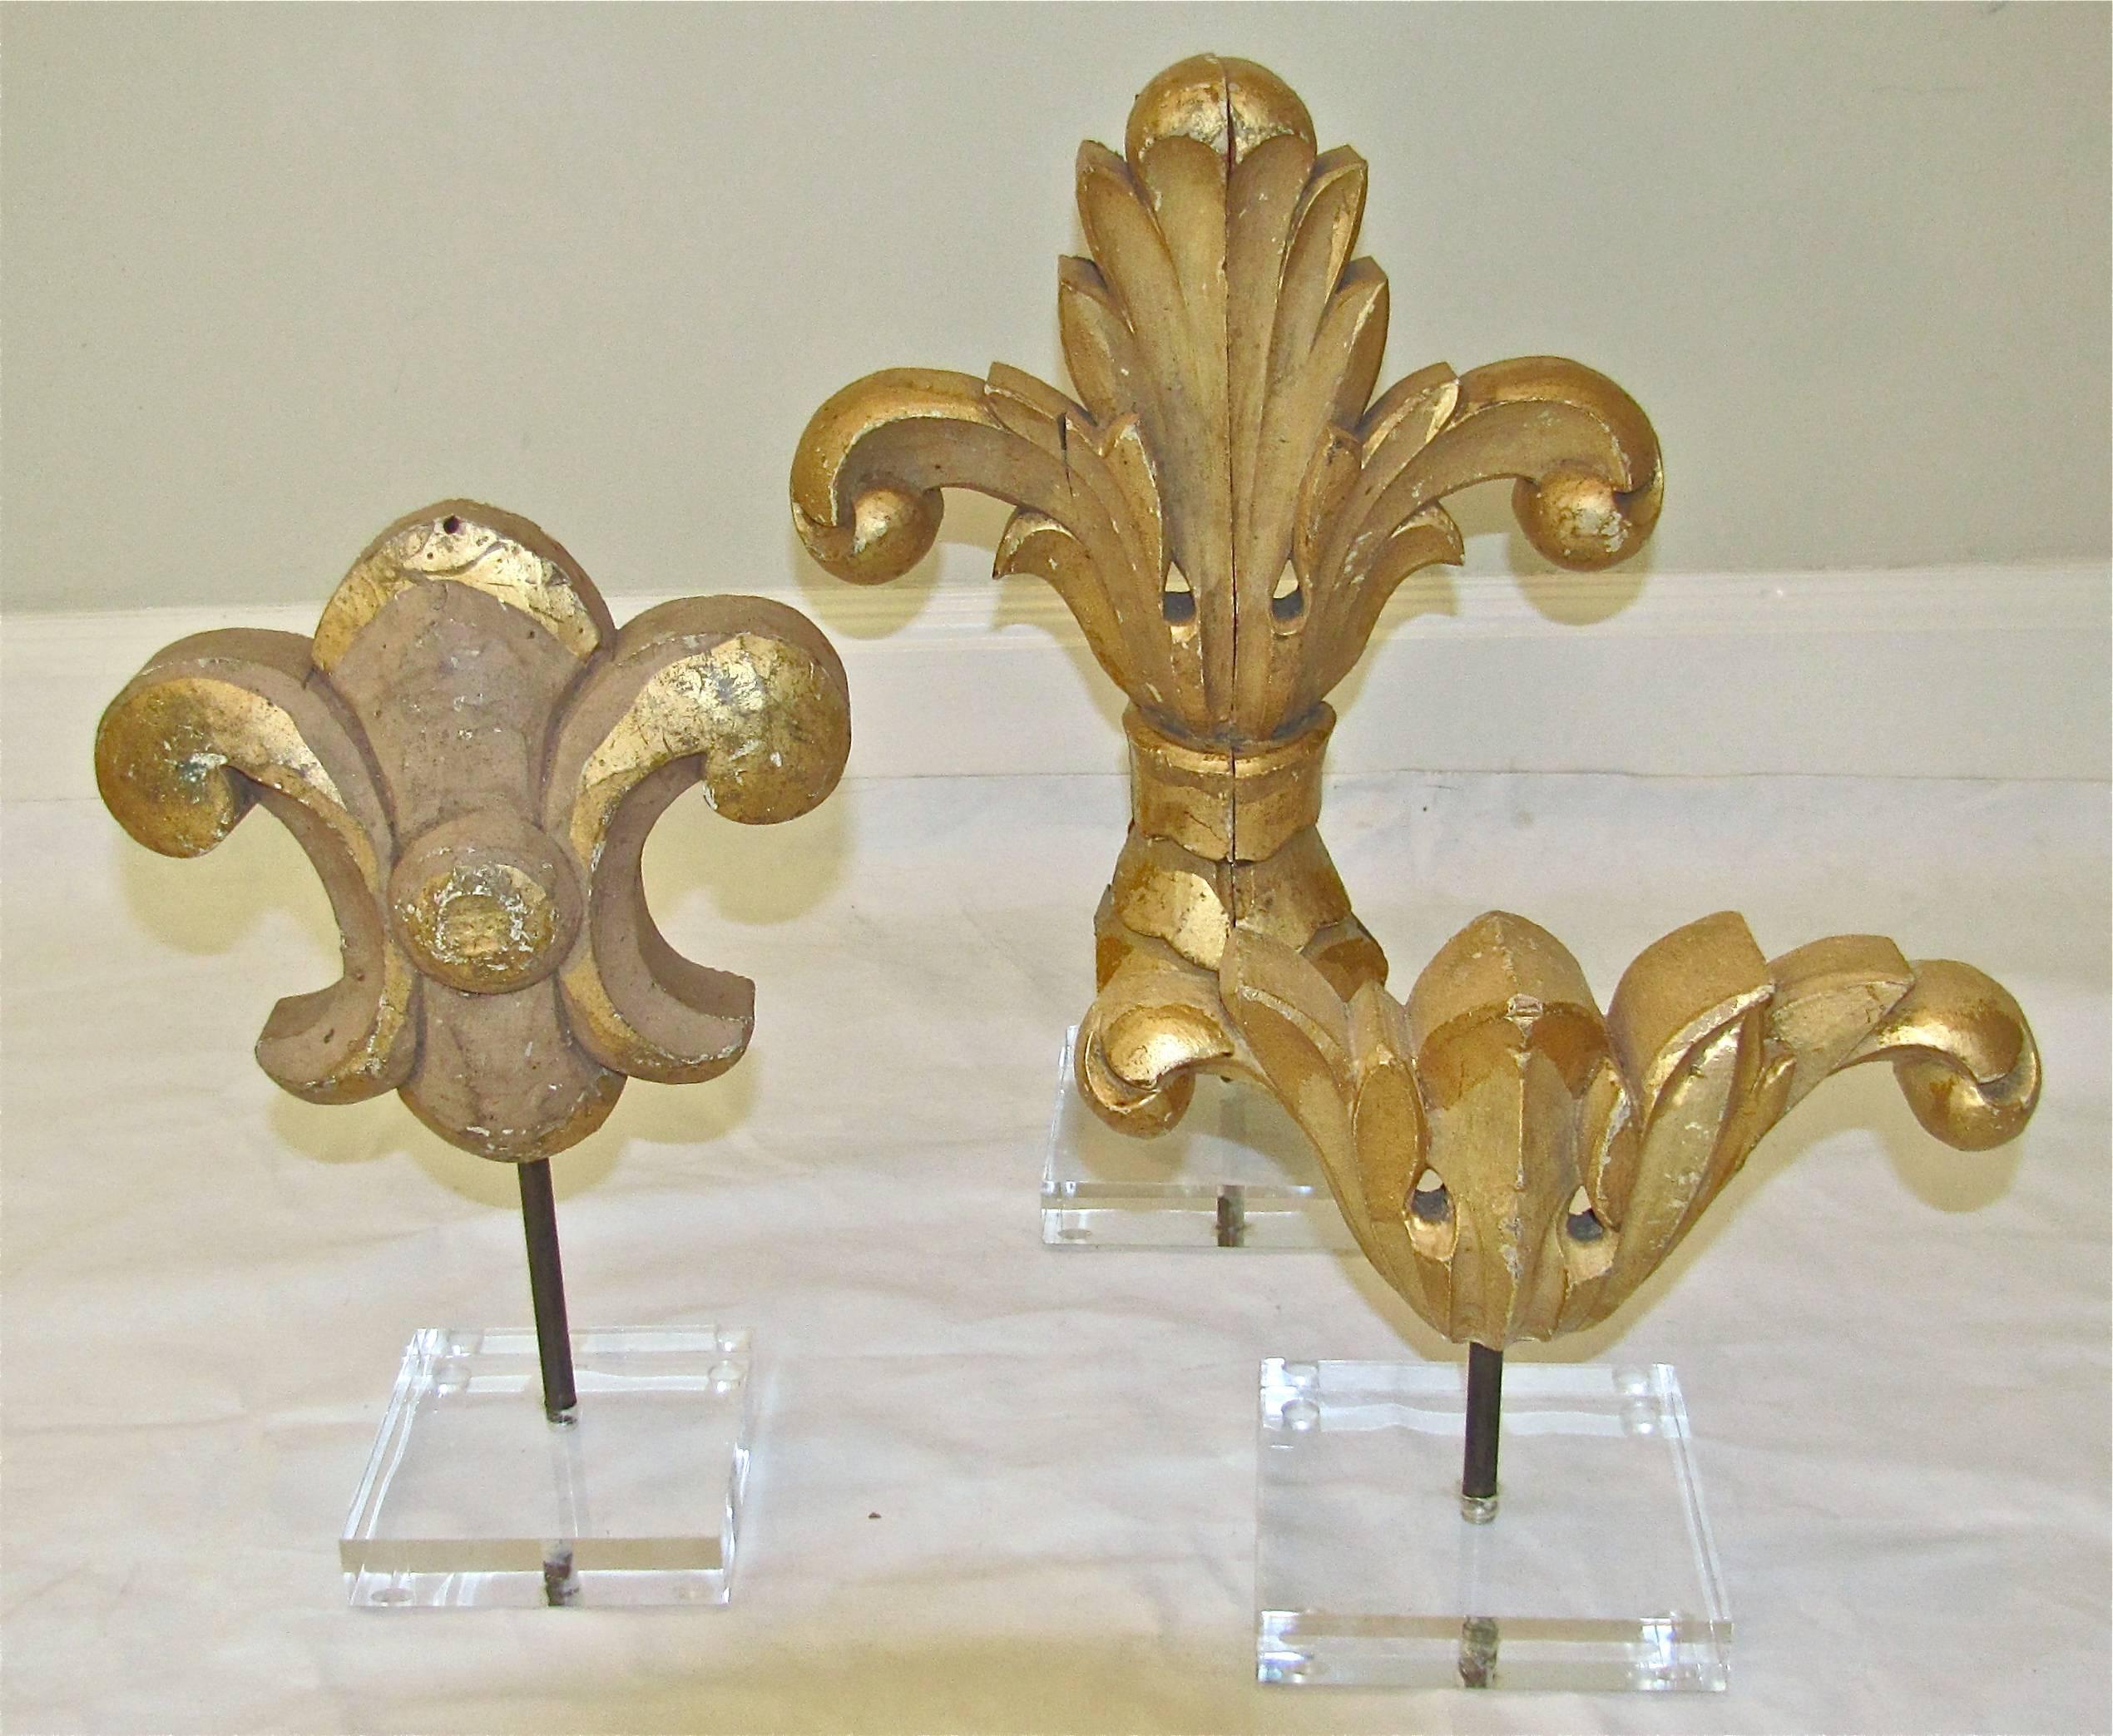 19th century architectural carved wood fragments each mounted on custom acrylic stand. Priced as group. Various sizes:
16